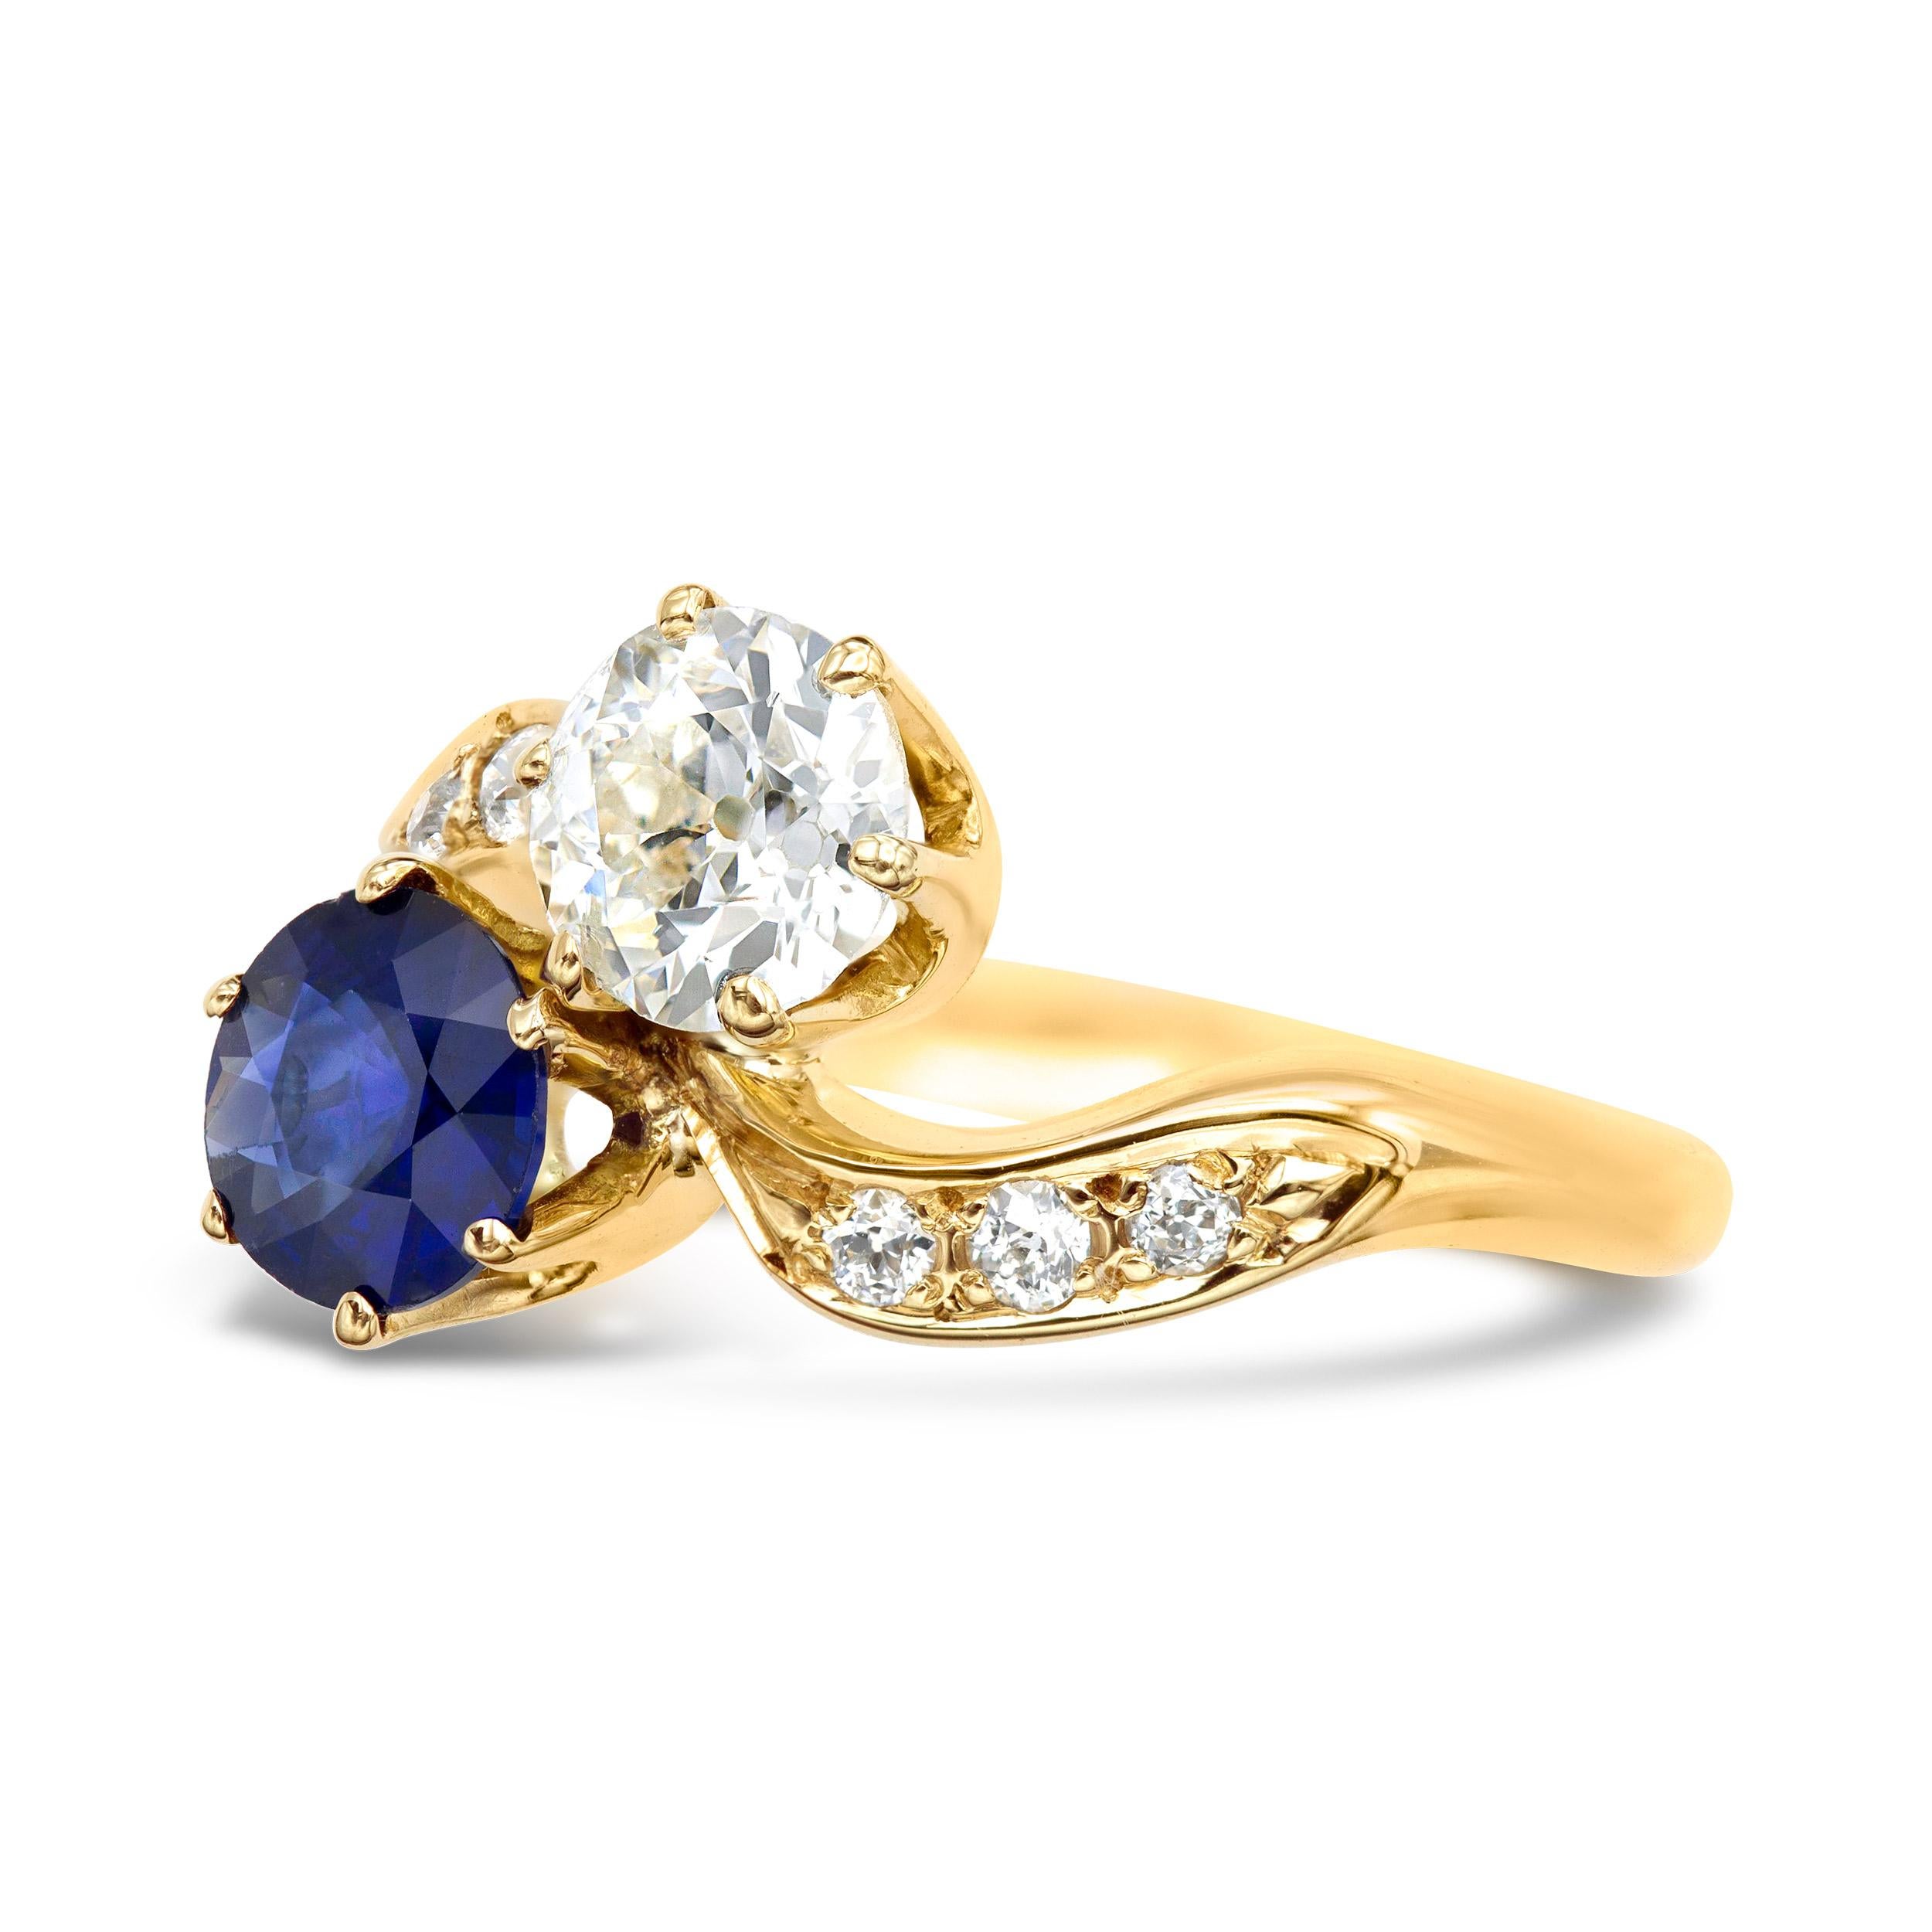 A darling toi et moi, dated back to the first half of the twentieth century, features a winning combination. The deep velvety blue sapphire is complimented by a super sweet old European cut diamond all set in a swirling 14 karat yellow gold setting.